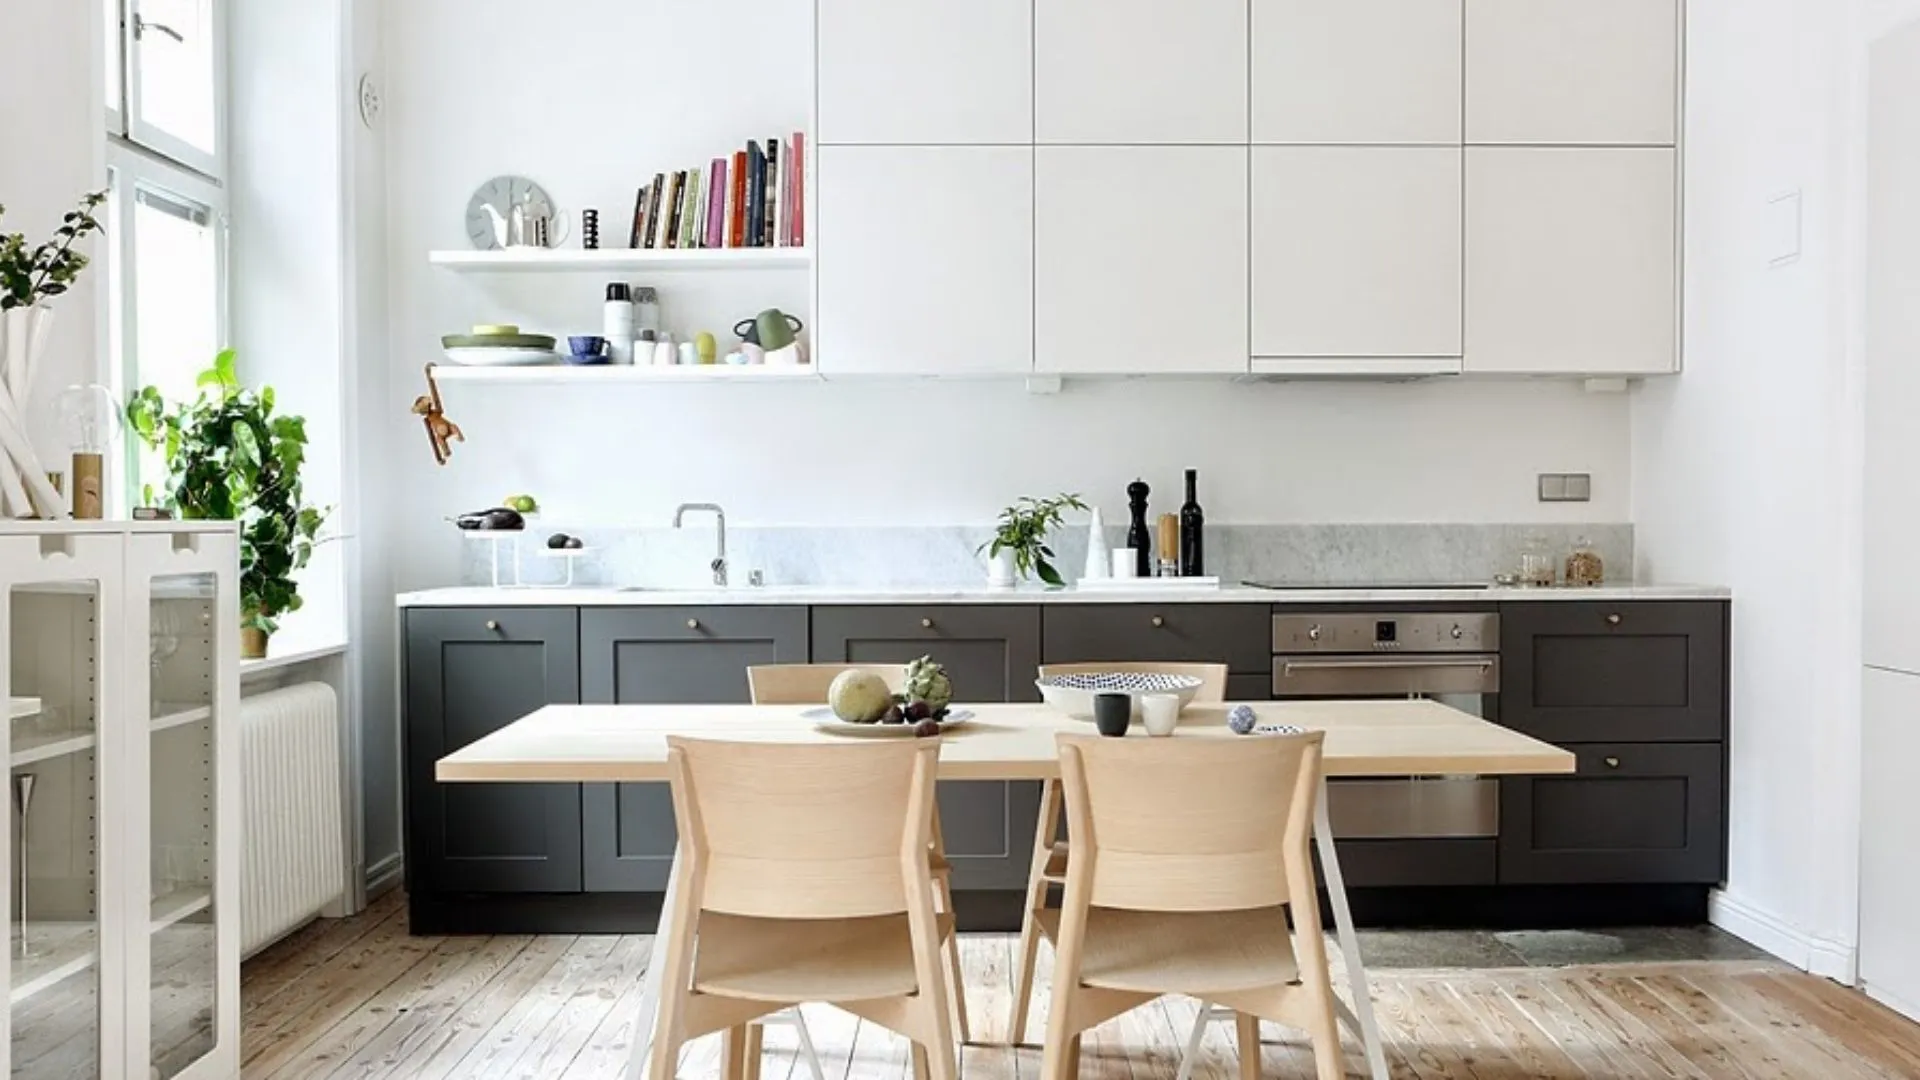 The One-Wall Kitchen